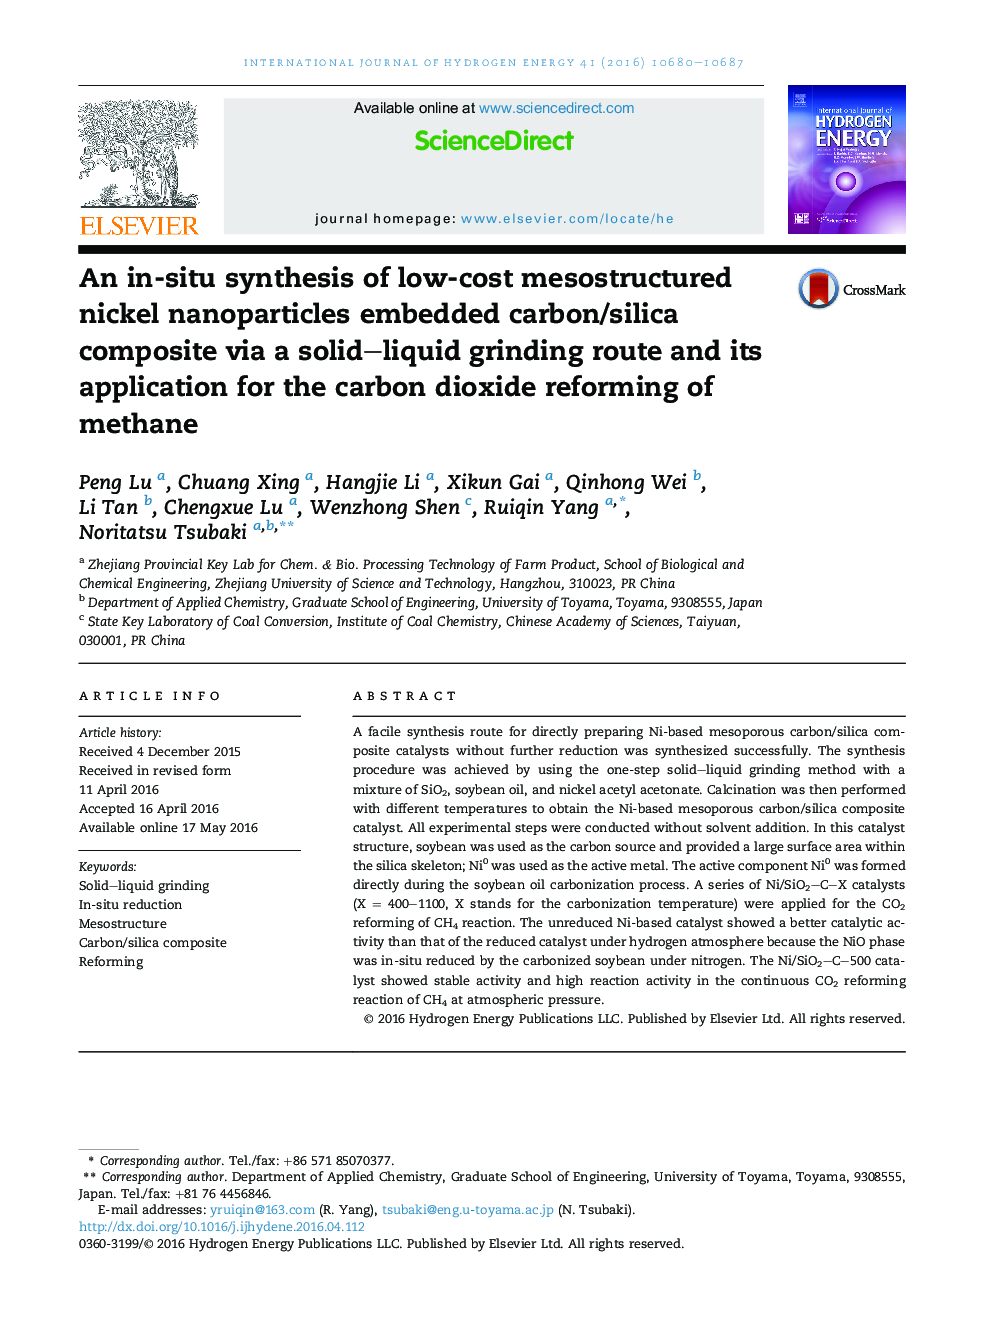 An in-situ synthesis of low-cost mesostructured nickel nanoparticles embedded carbon/silica composite via a solid–liquid grinding route and its application for the carbon dioxide reforming of methane